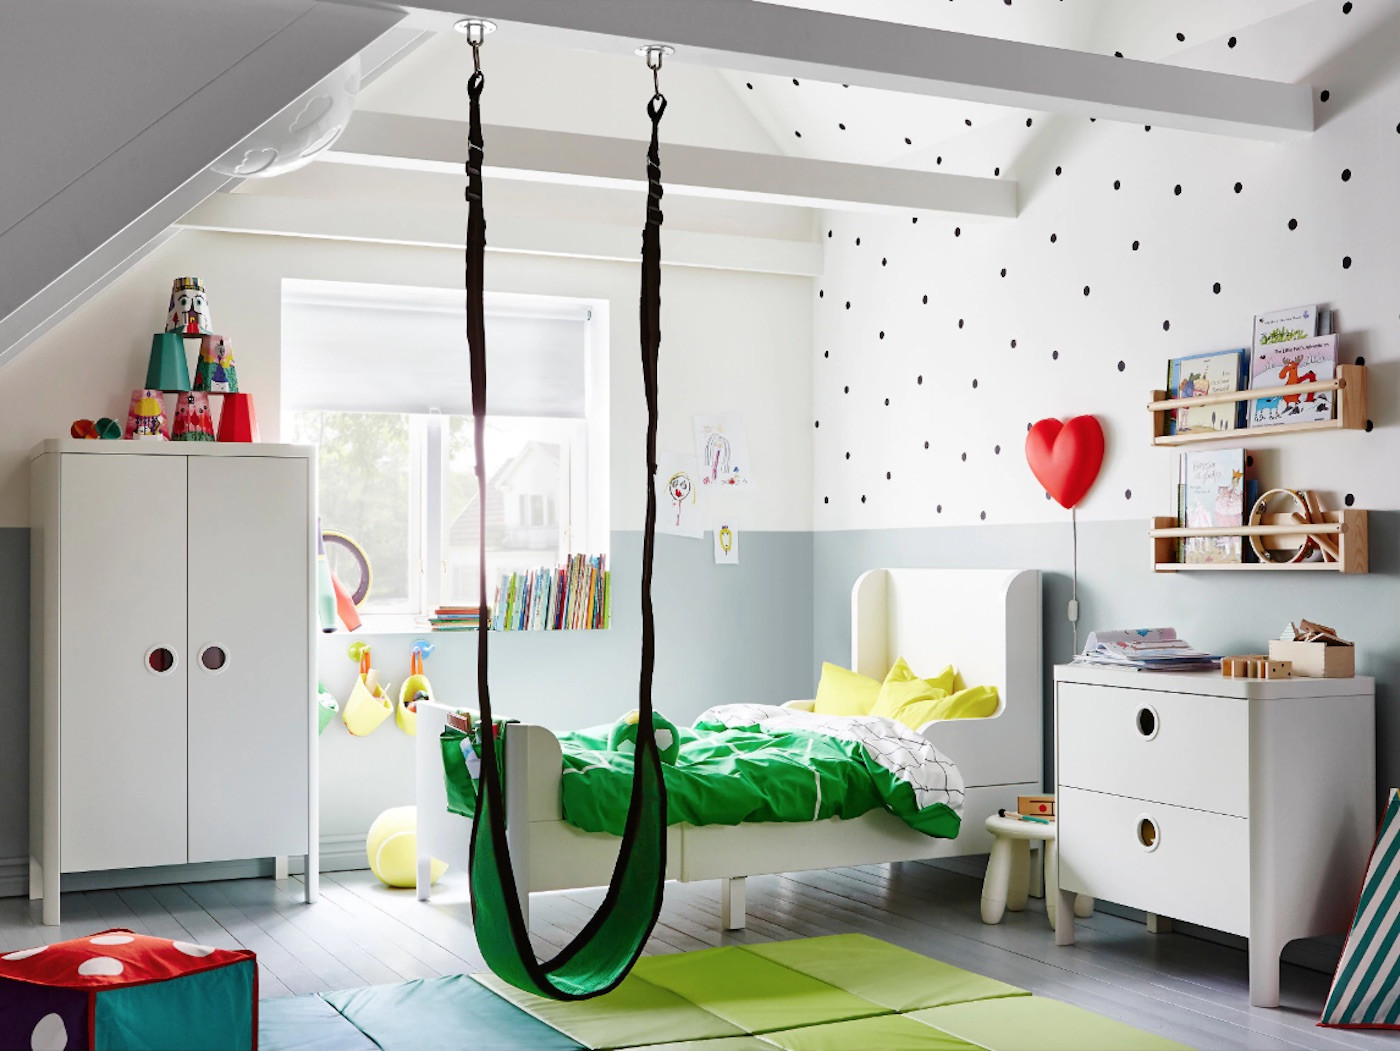 Ideas For Kids Rooms
 18 Fun Kids Room Ideas For Inspiration Simplemost